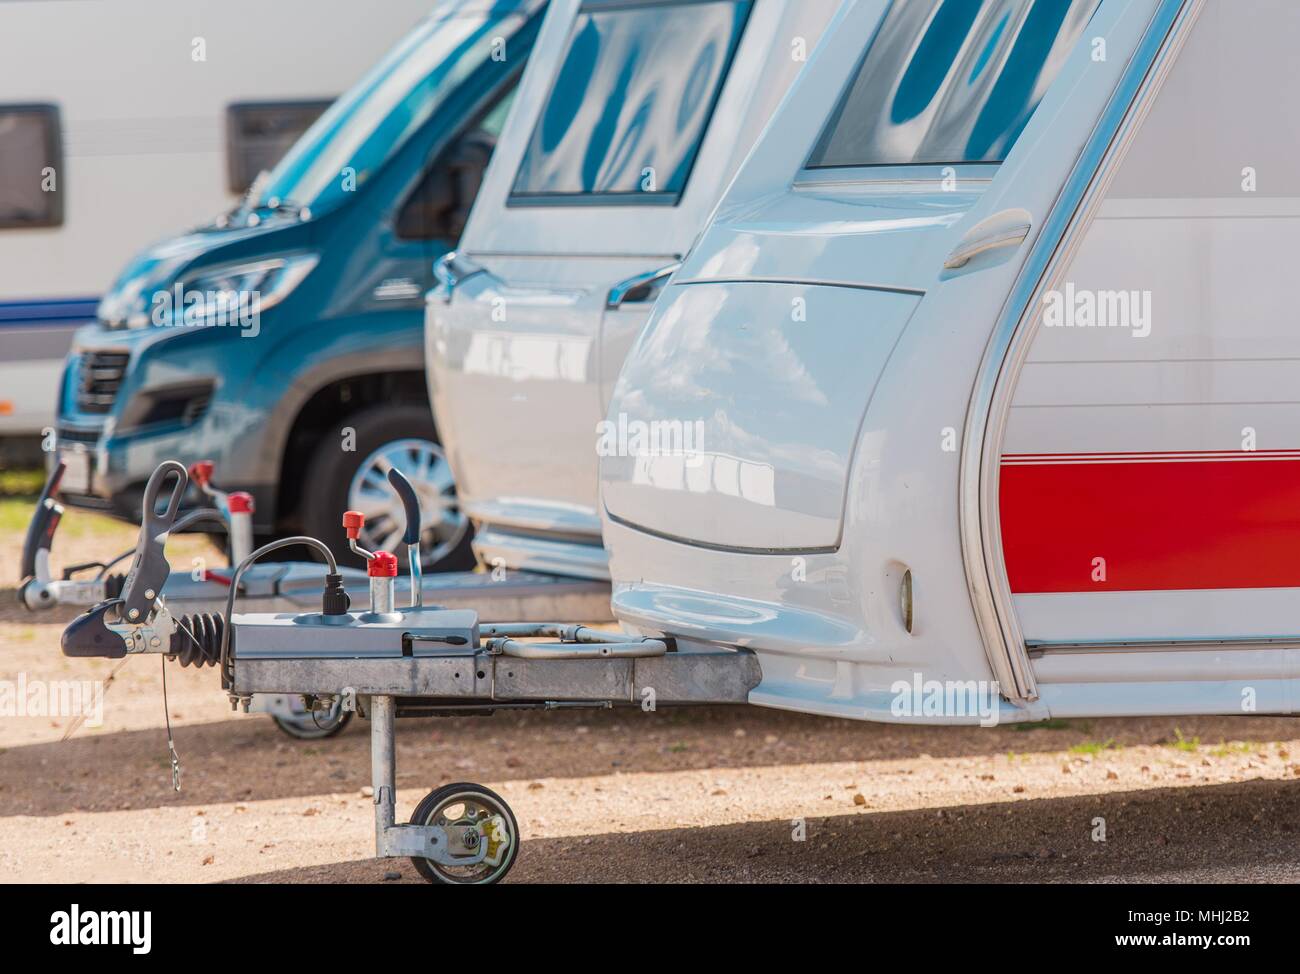 RV Camping Storage. Secured Parking Lot For Recreational Vehicles. Stock Photo